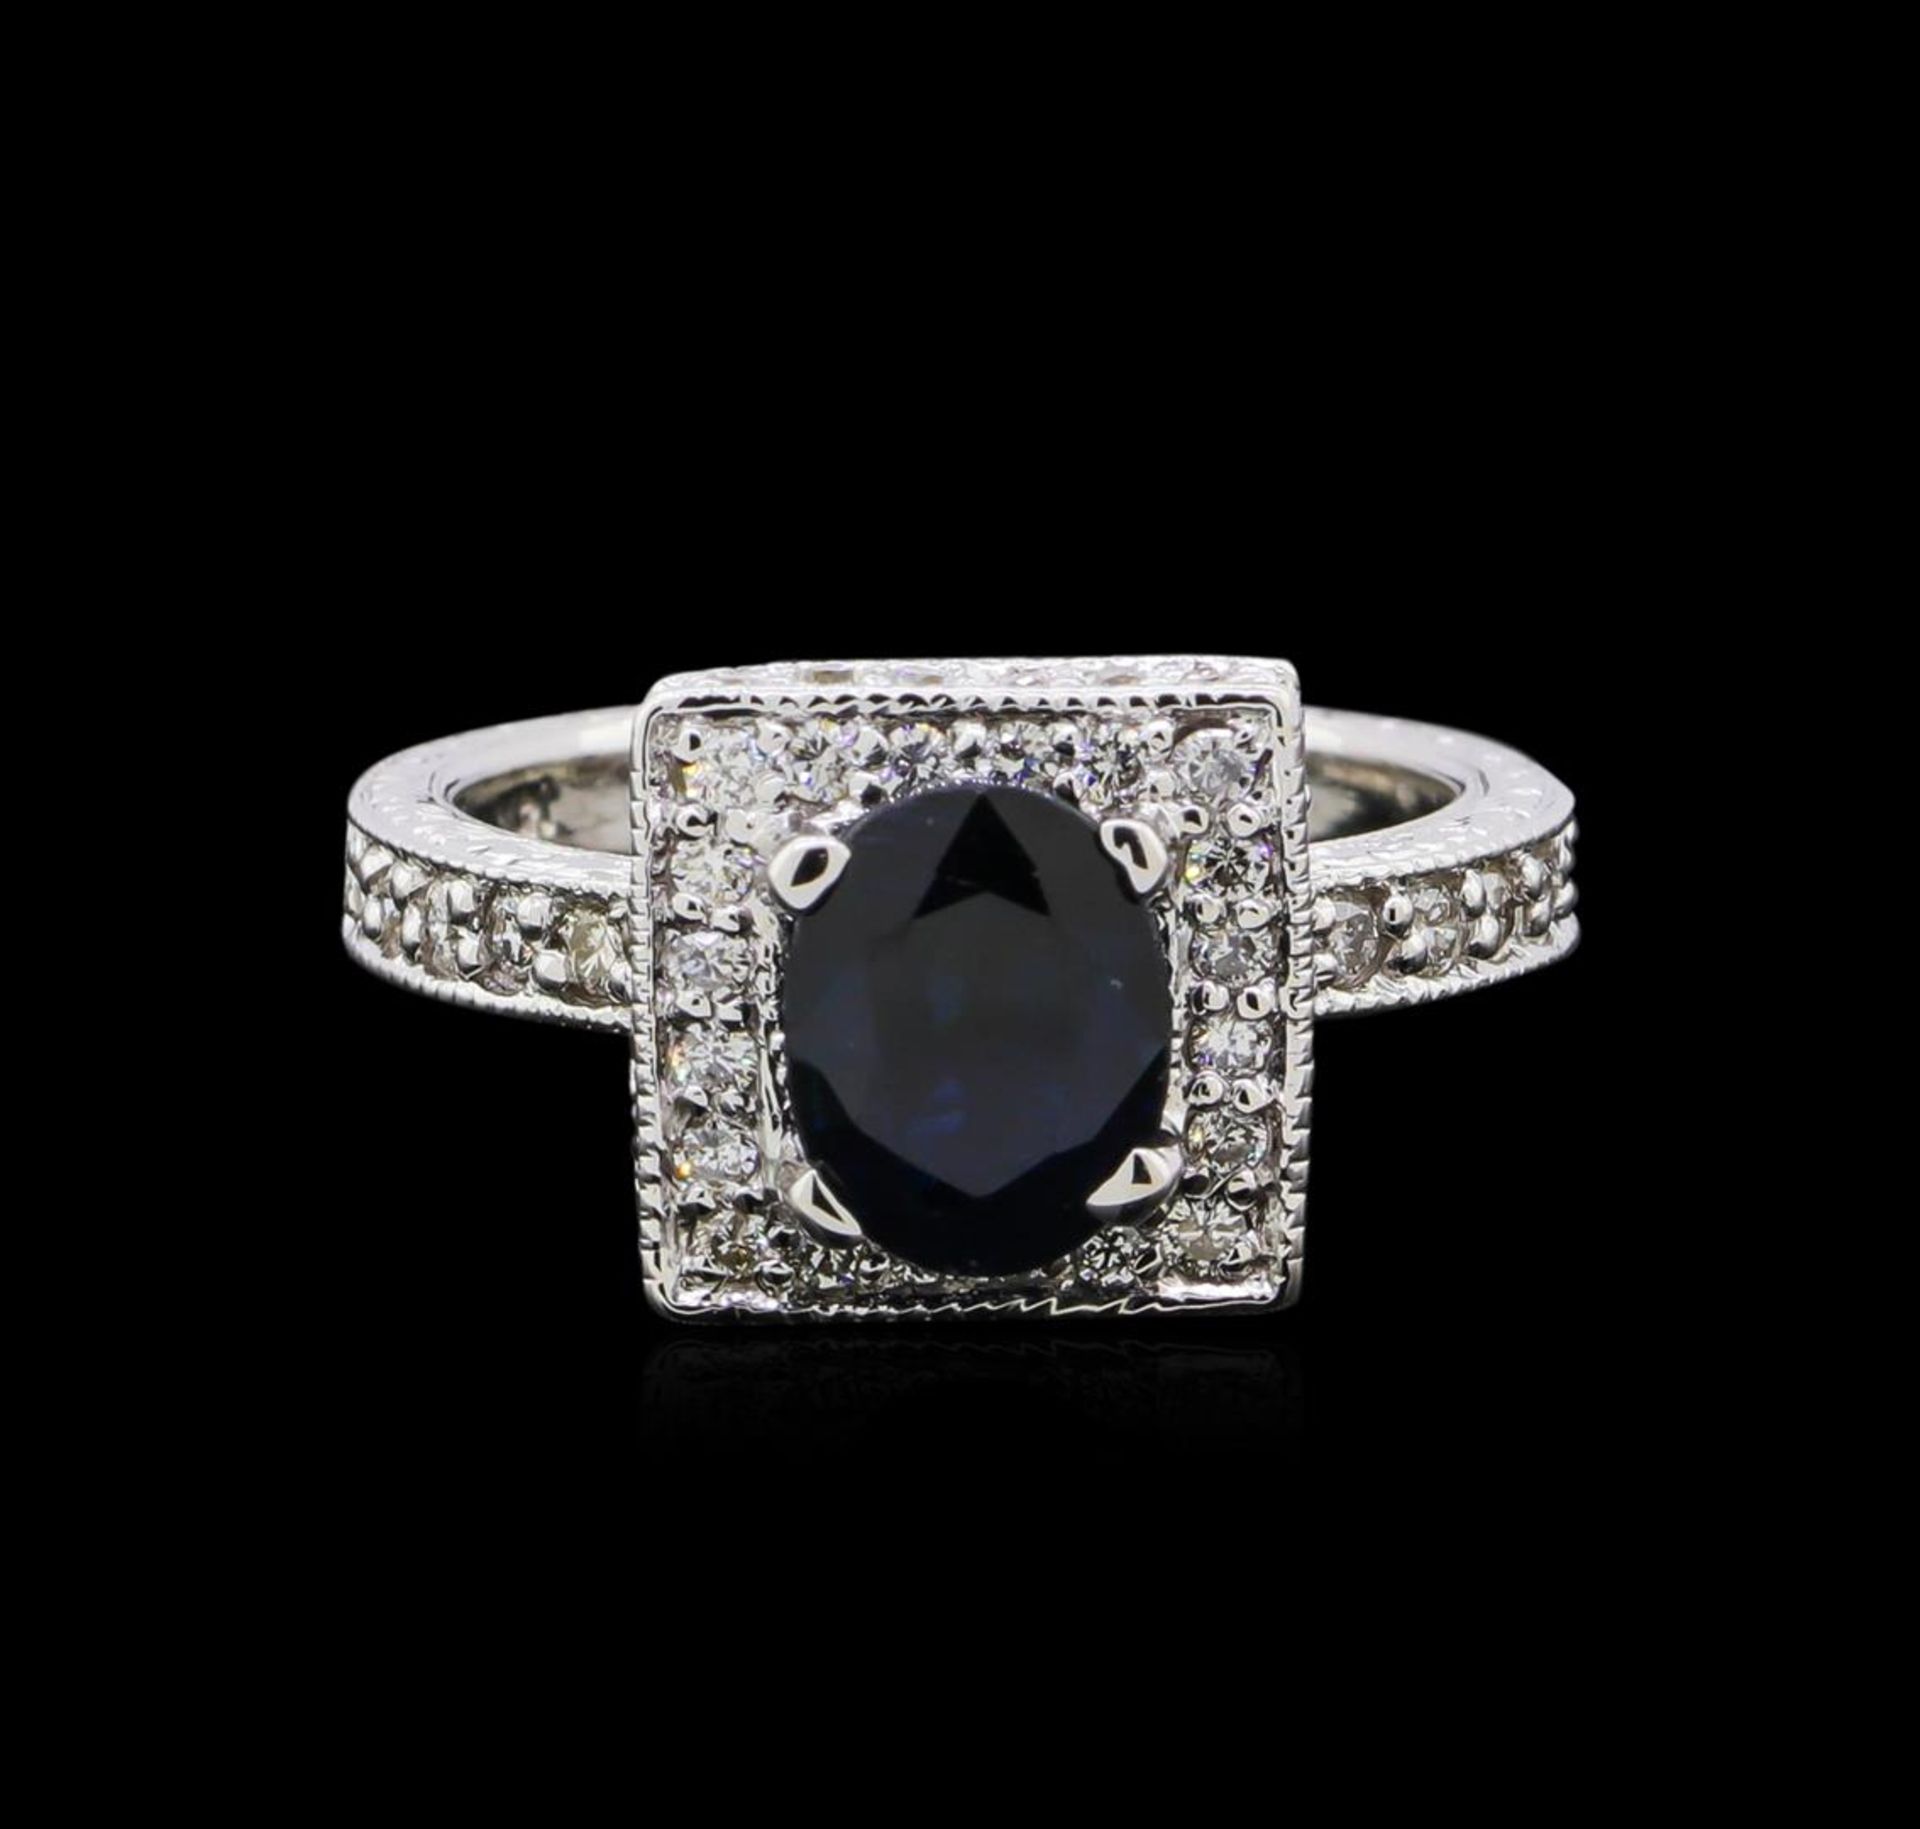 1.68 ctw Sapphire and Diamond Ring - 14KT White Gold - Image 2 of 4